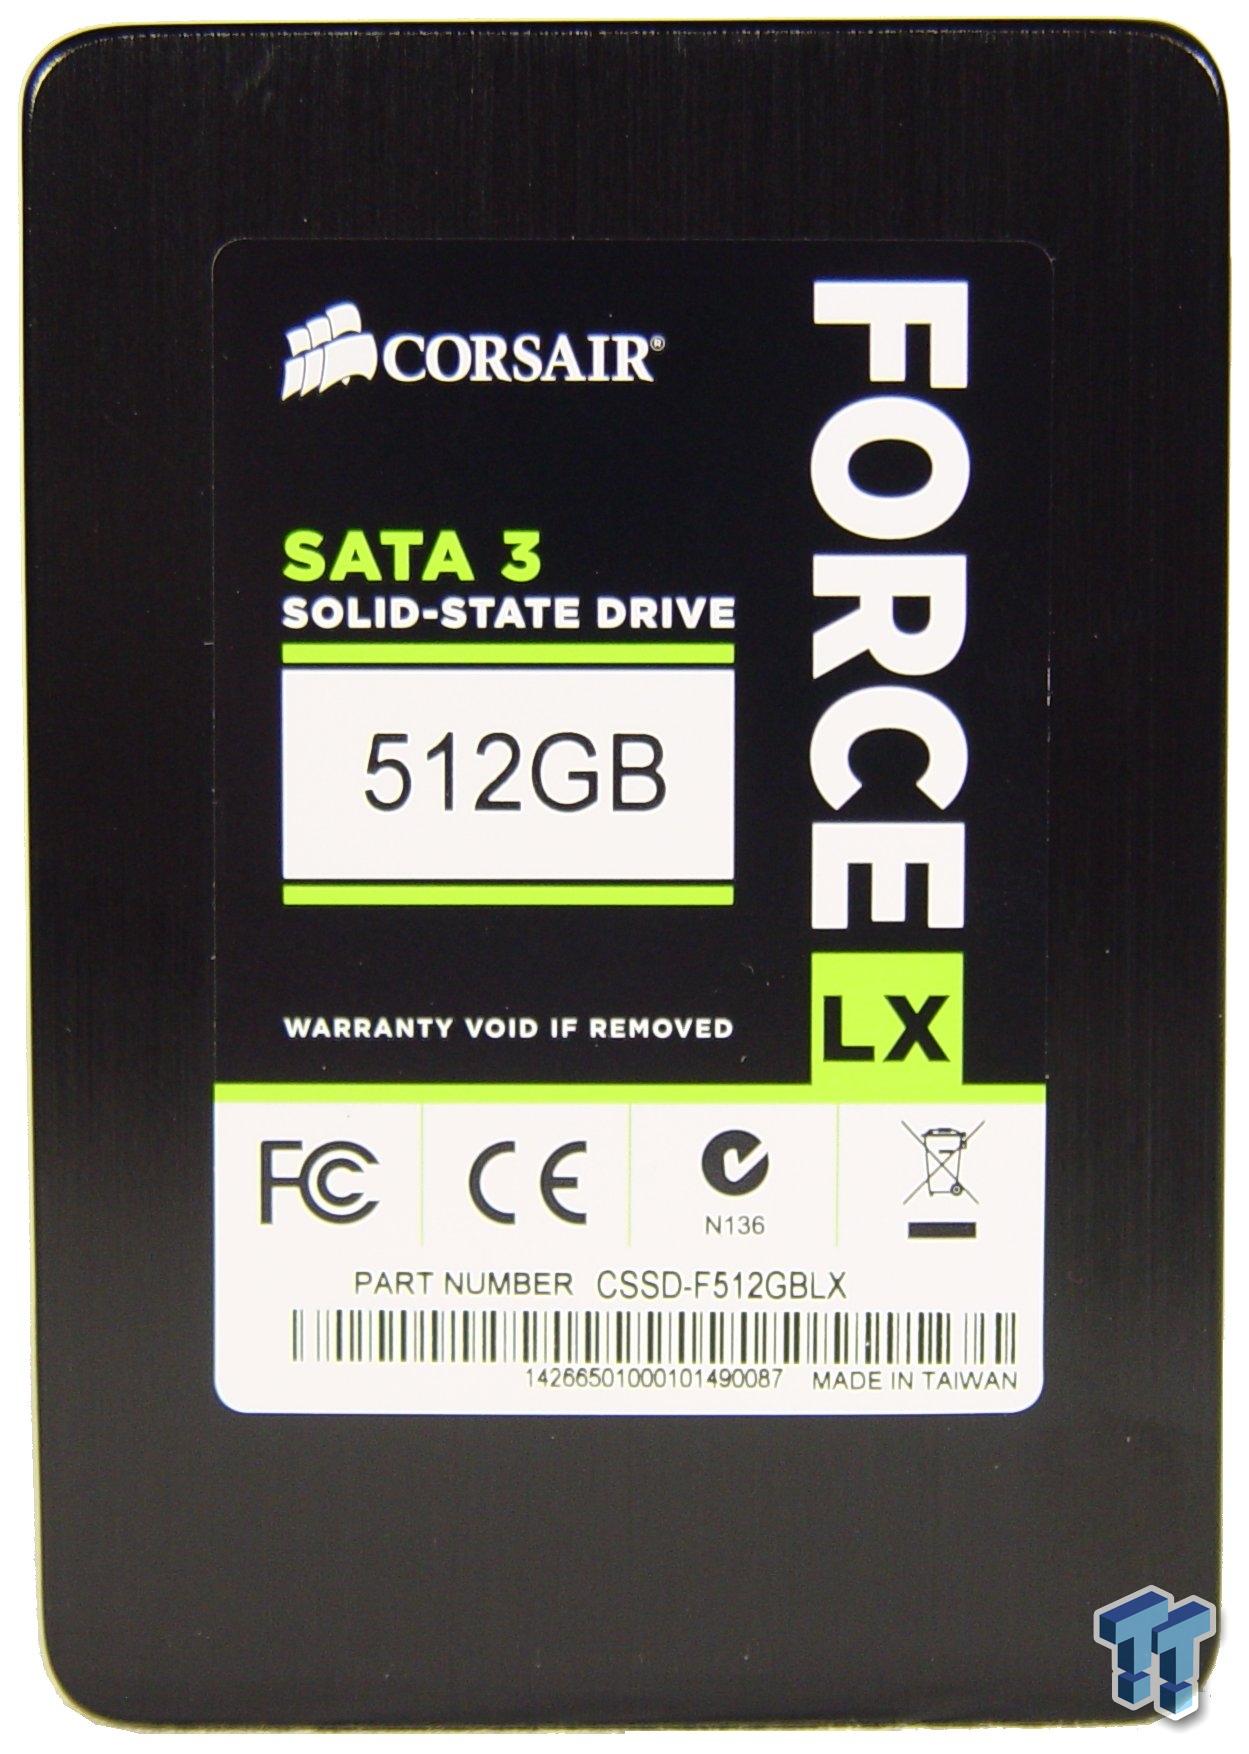 Corsair Force LX SSD Review (256GB) - A Great Budget-Friendly SSD